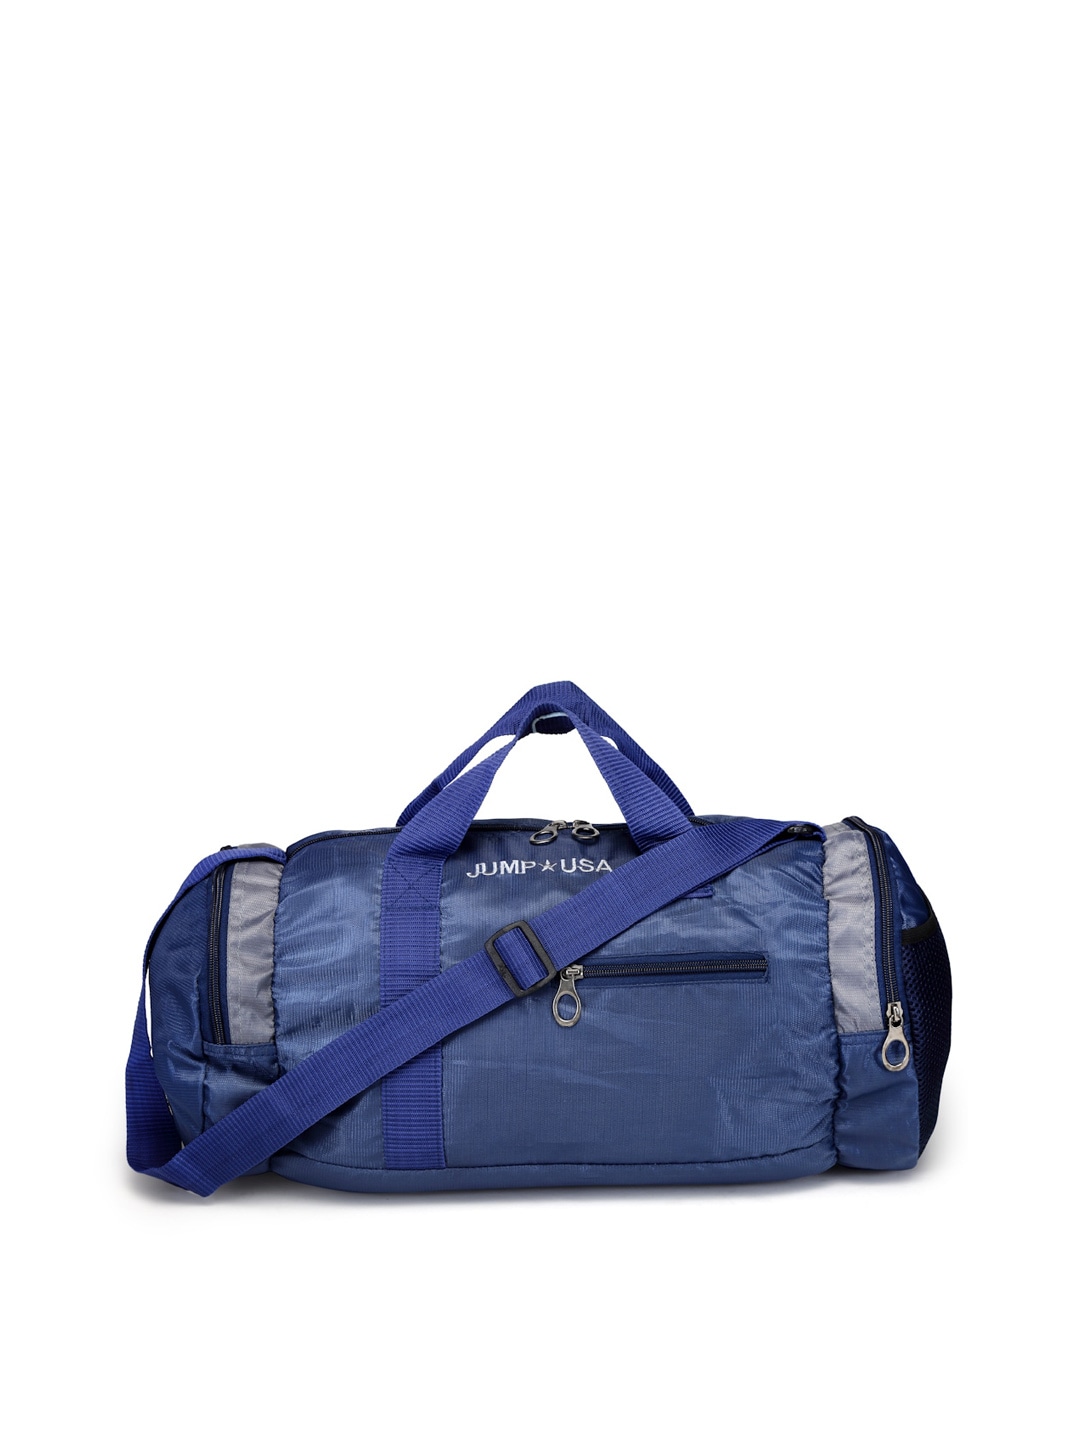 JUMP USA Unisex Navy Blue Solid Training Duffel Bag Price in India